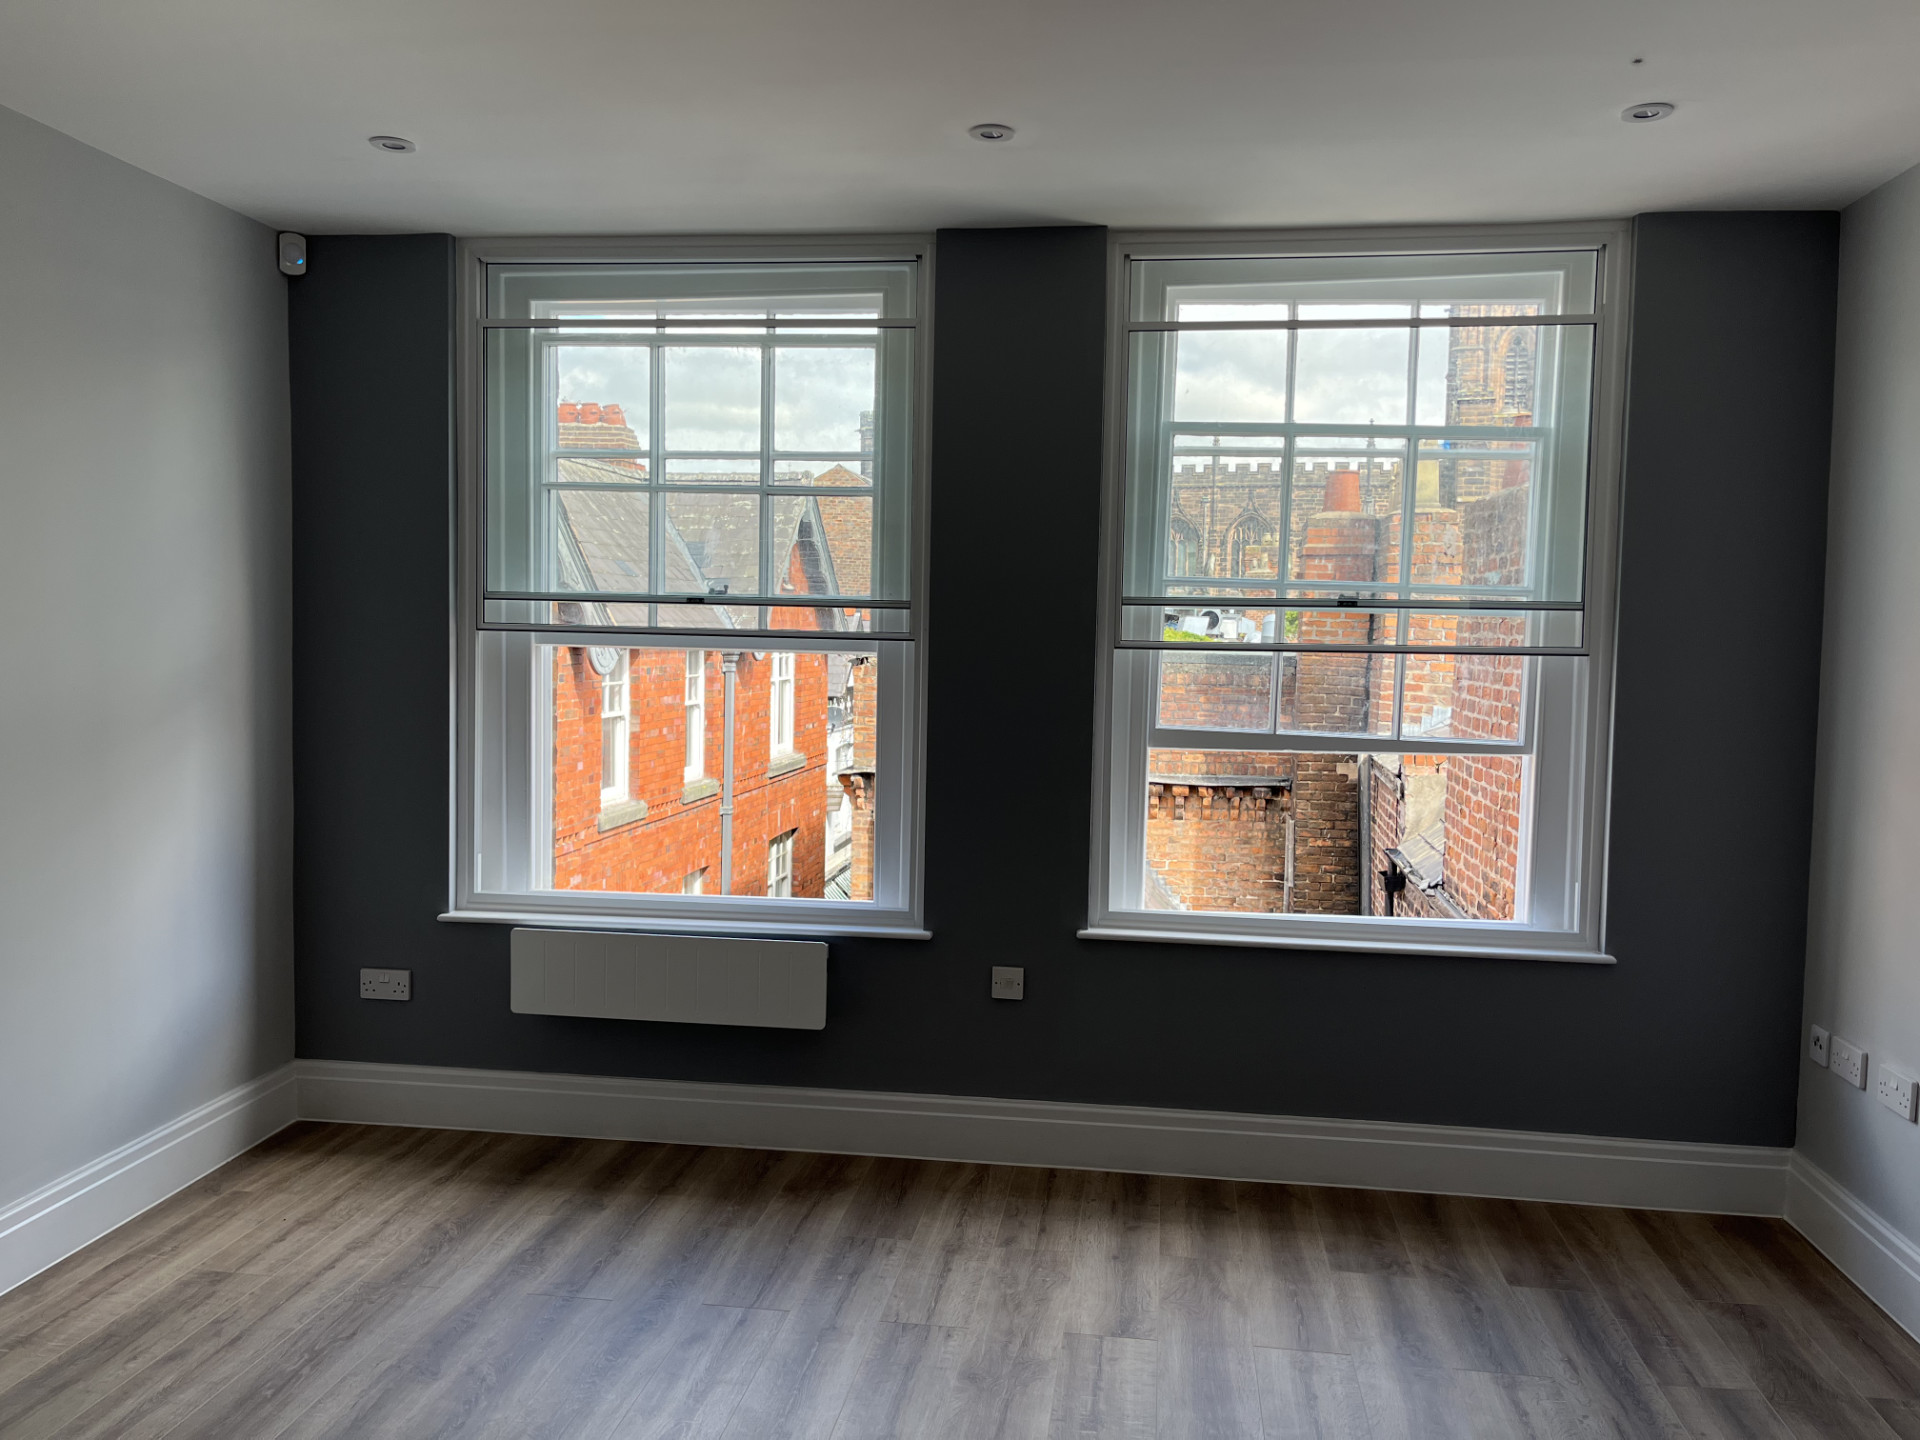 Living space at 19 Eastgate, Chester, Cheshire, 2023